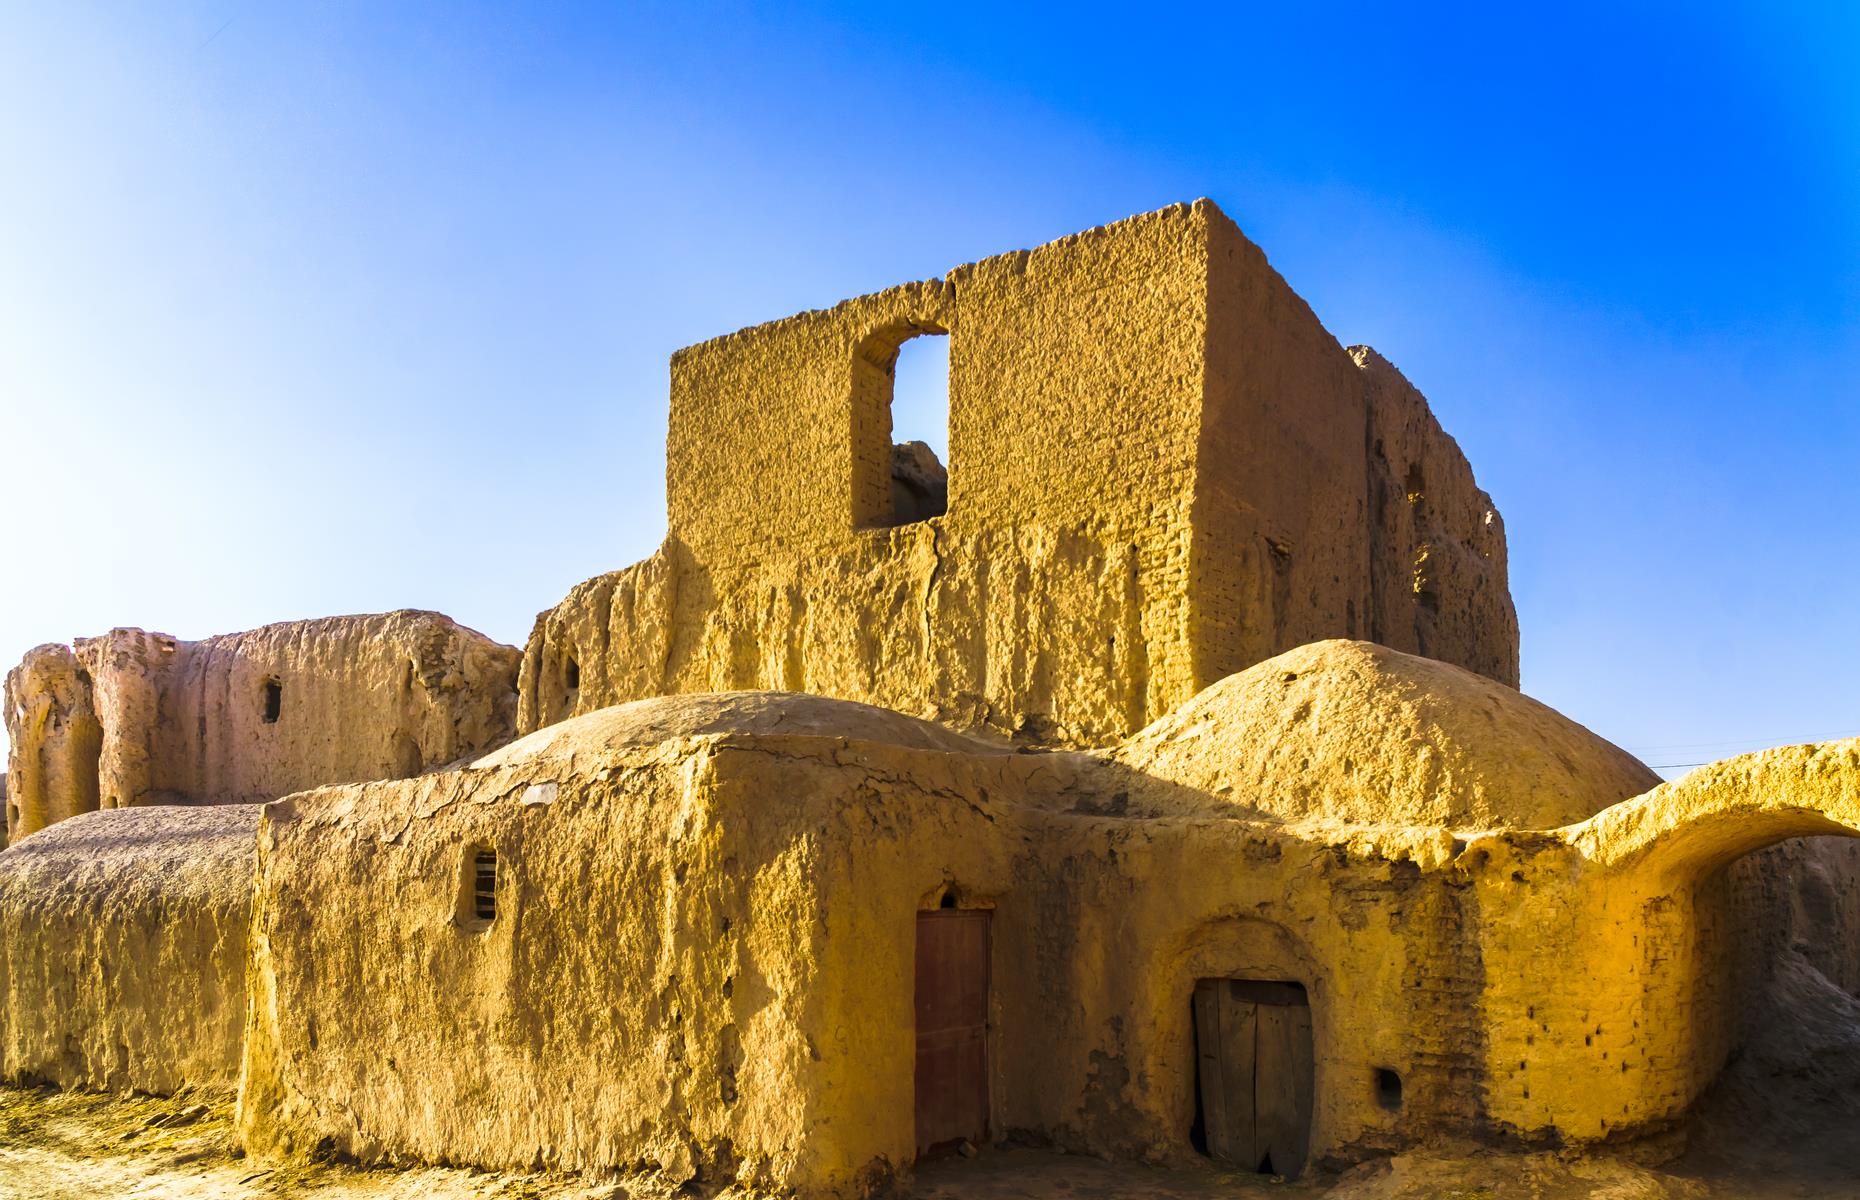 Among the sunbaked remains of the ancient mud fortress are a pigeon house, water reservoir, mill and many houses. It is protected by 14 round crenellated towers and there are two imposing gateways. Incredibly, a handful of families still live in the age-old adobe citadel.